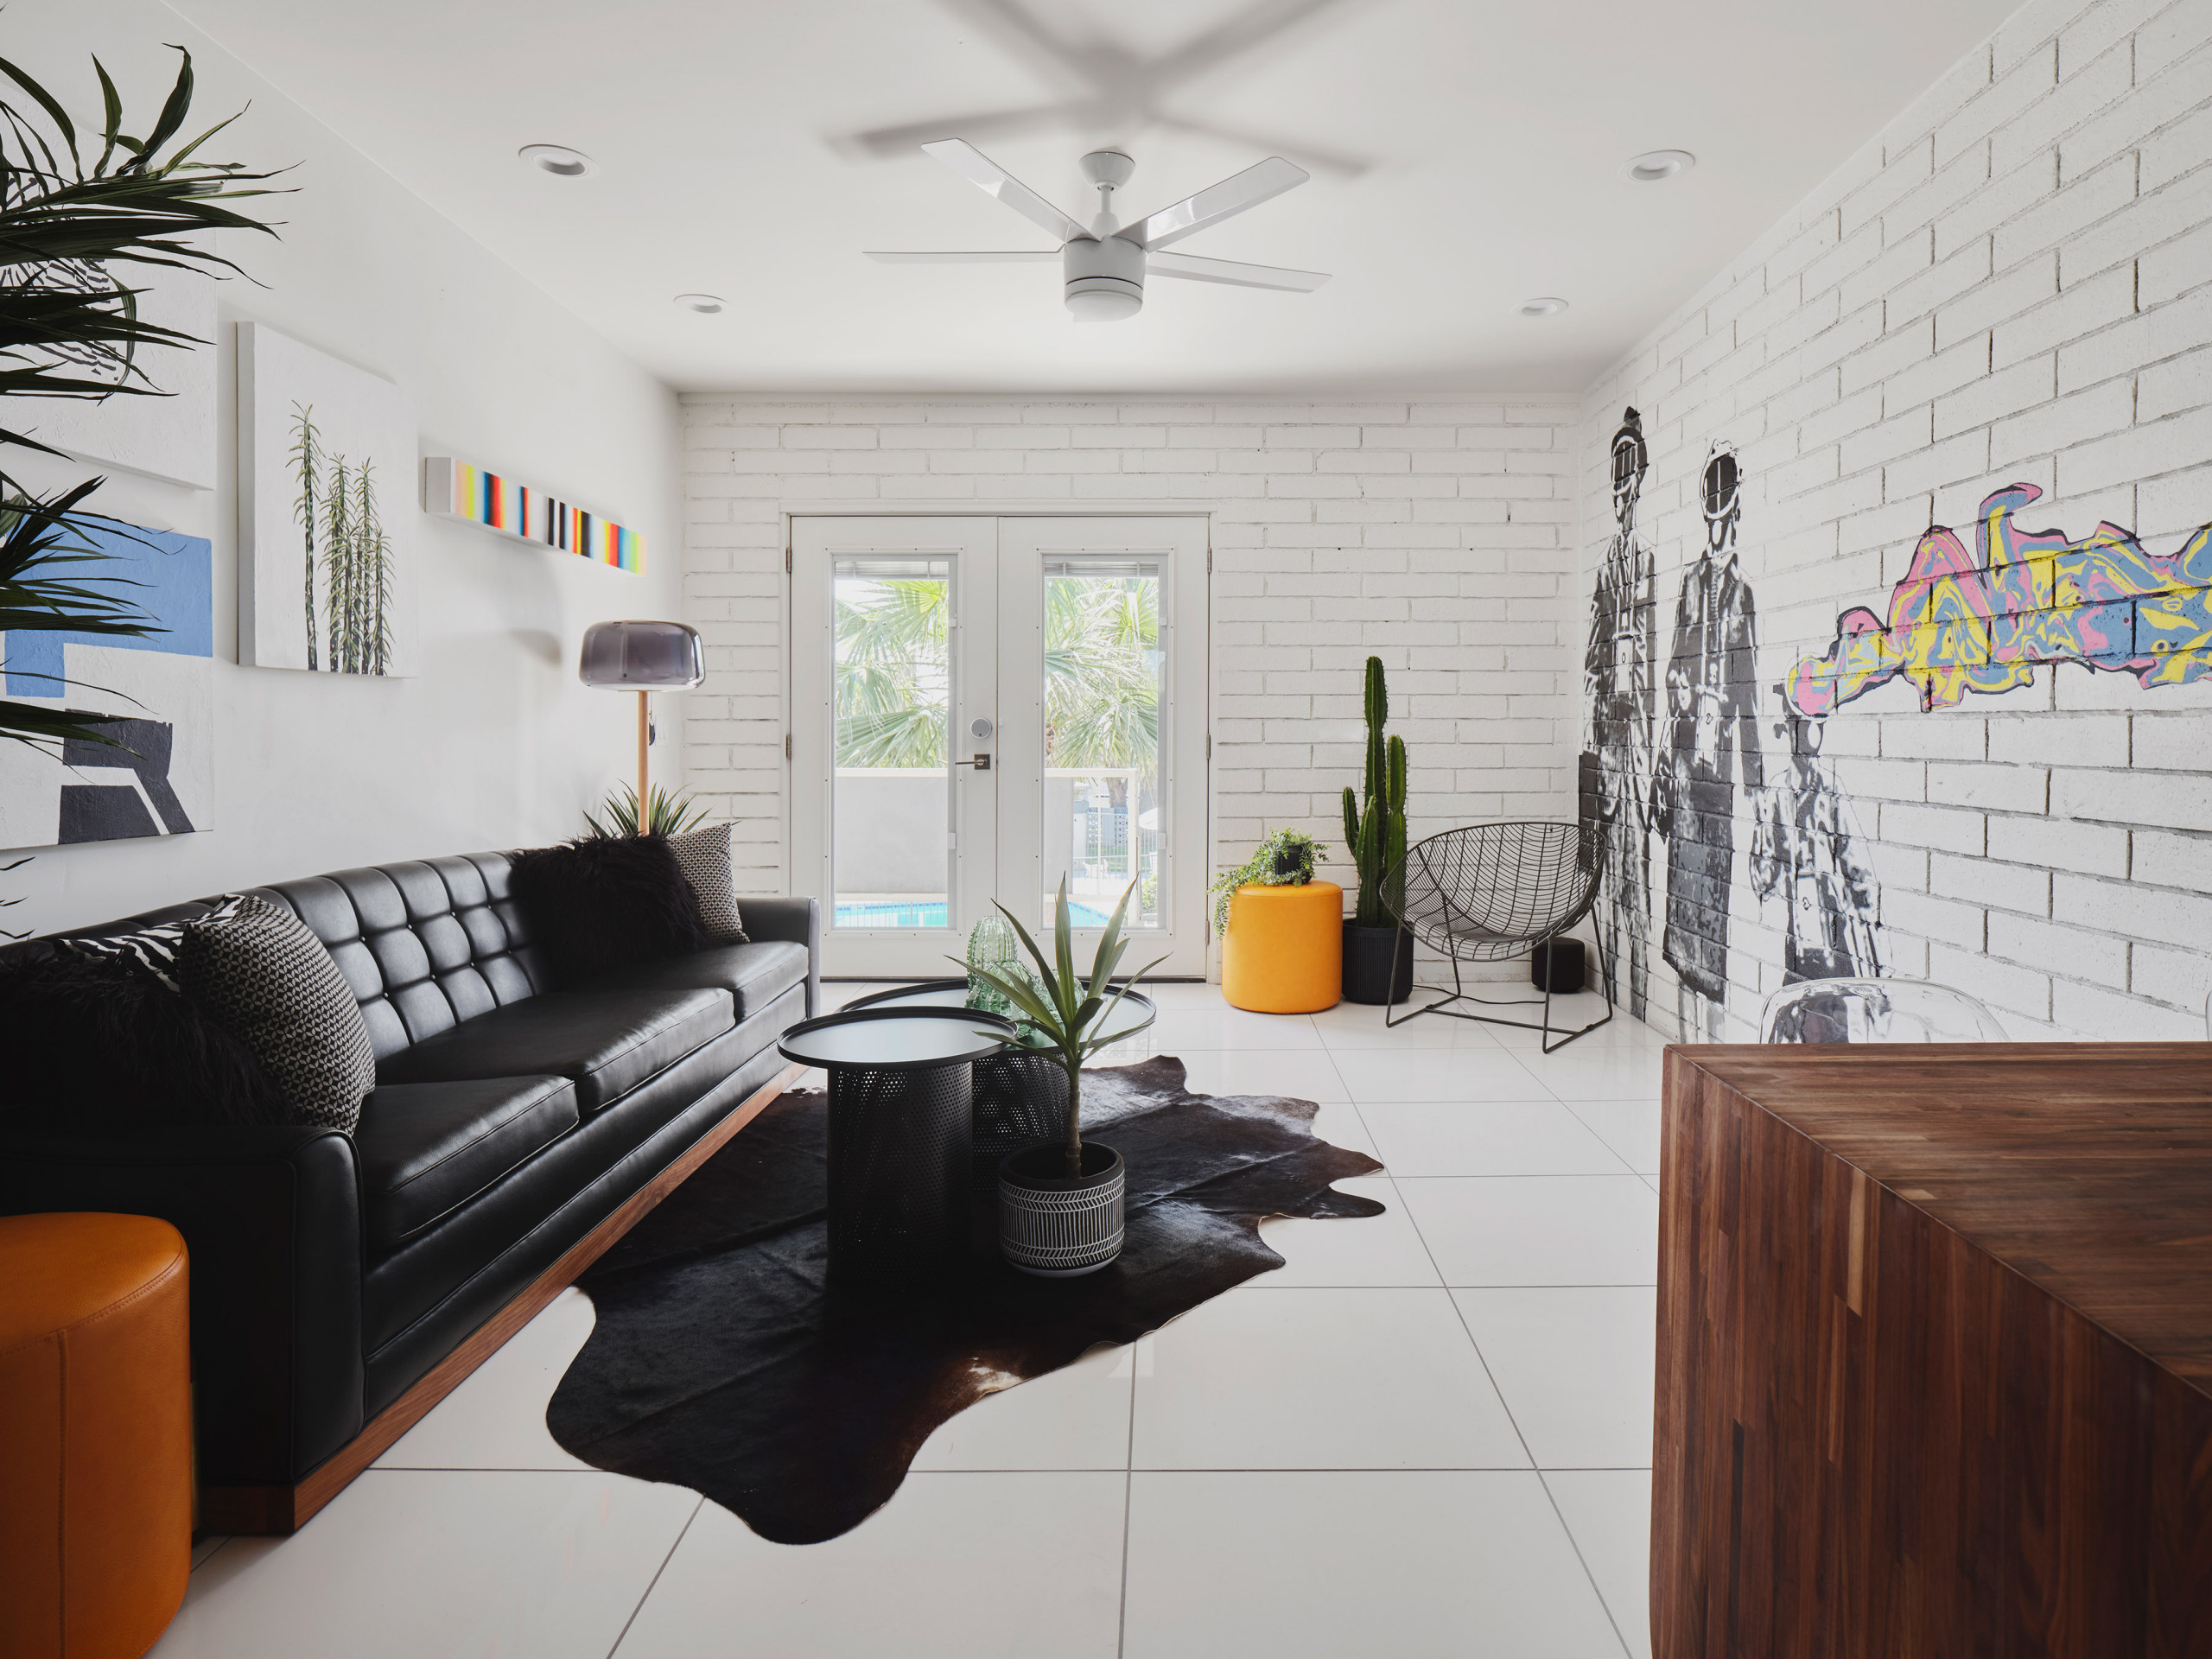 Living Rooms With Black Sofas Houzz, What Color Accent Chair Goes With Black Sofa